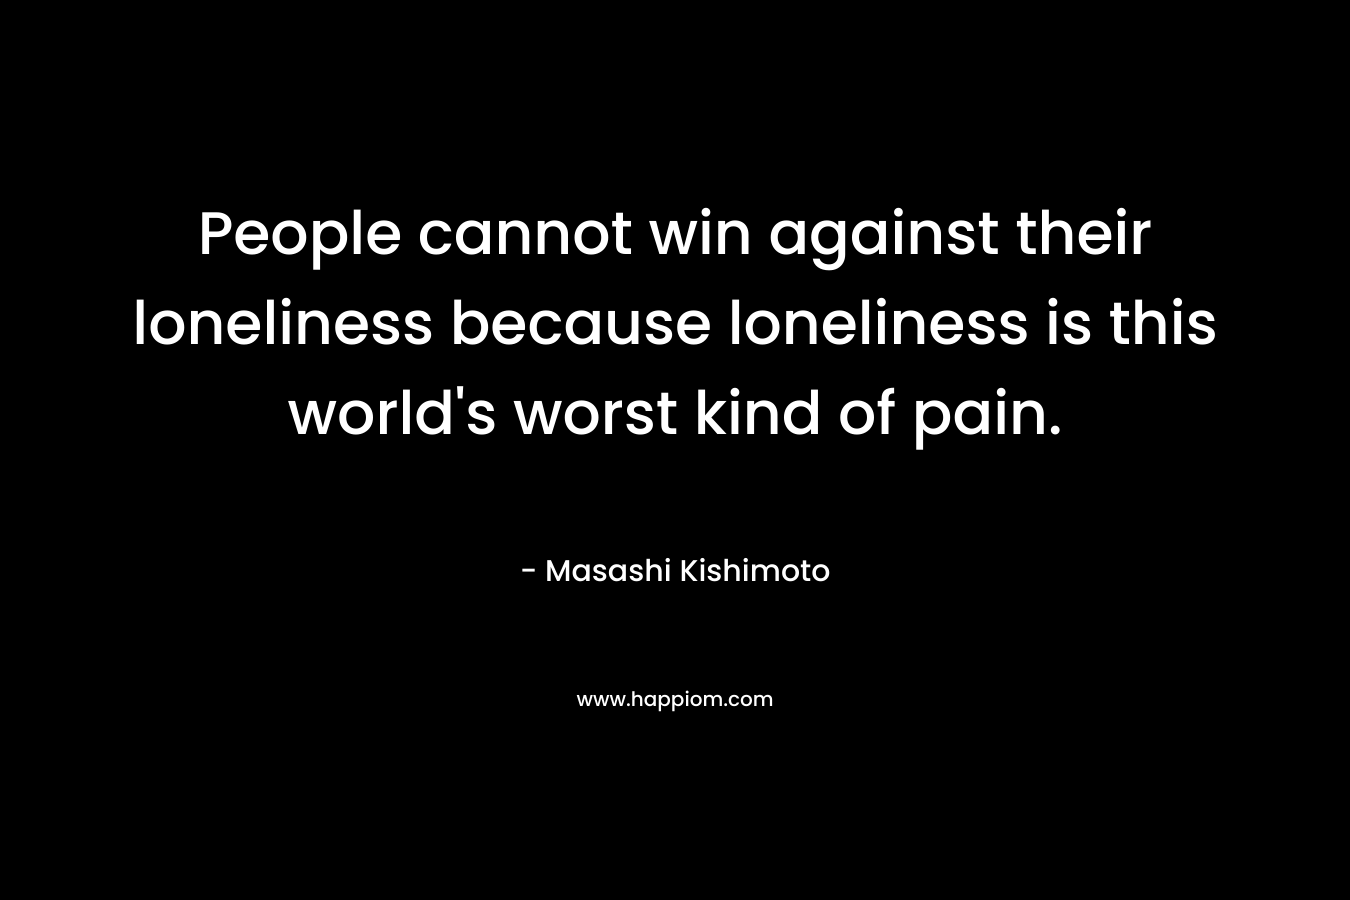 People cannot win against their loneliness because loneliness is this world's worst kind of pain.